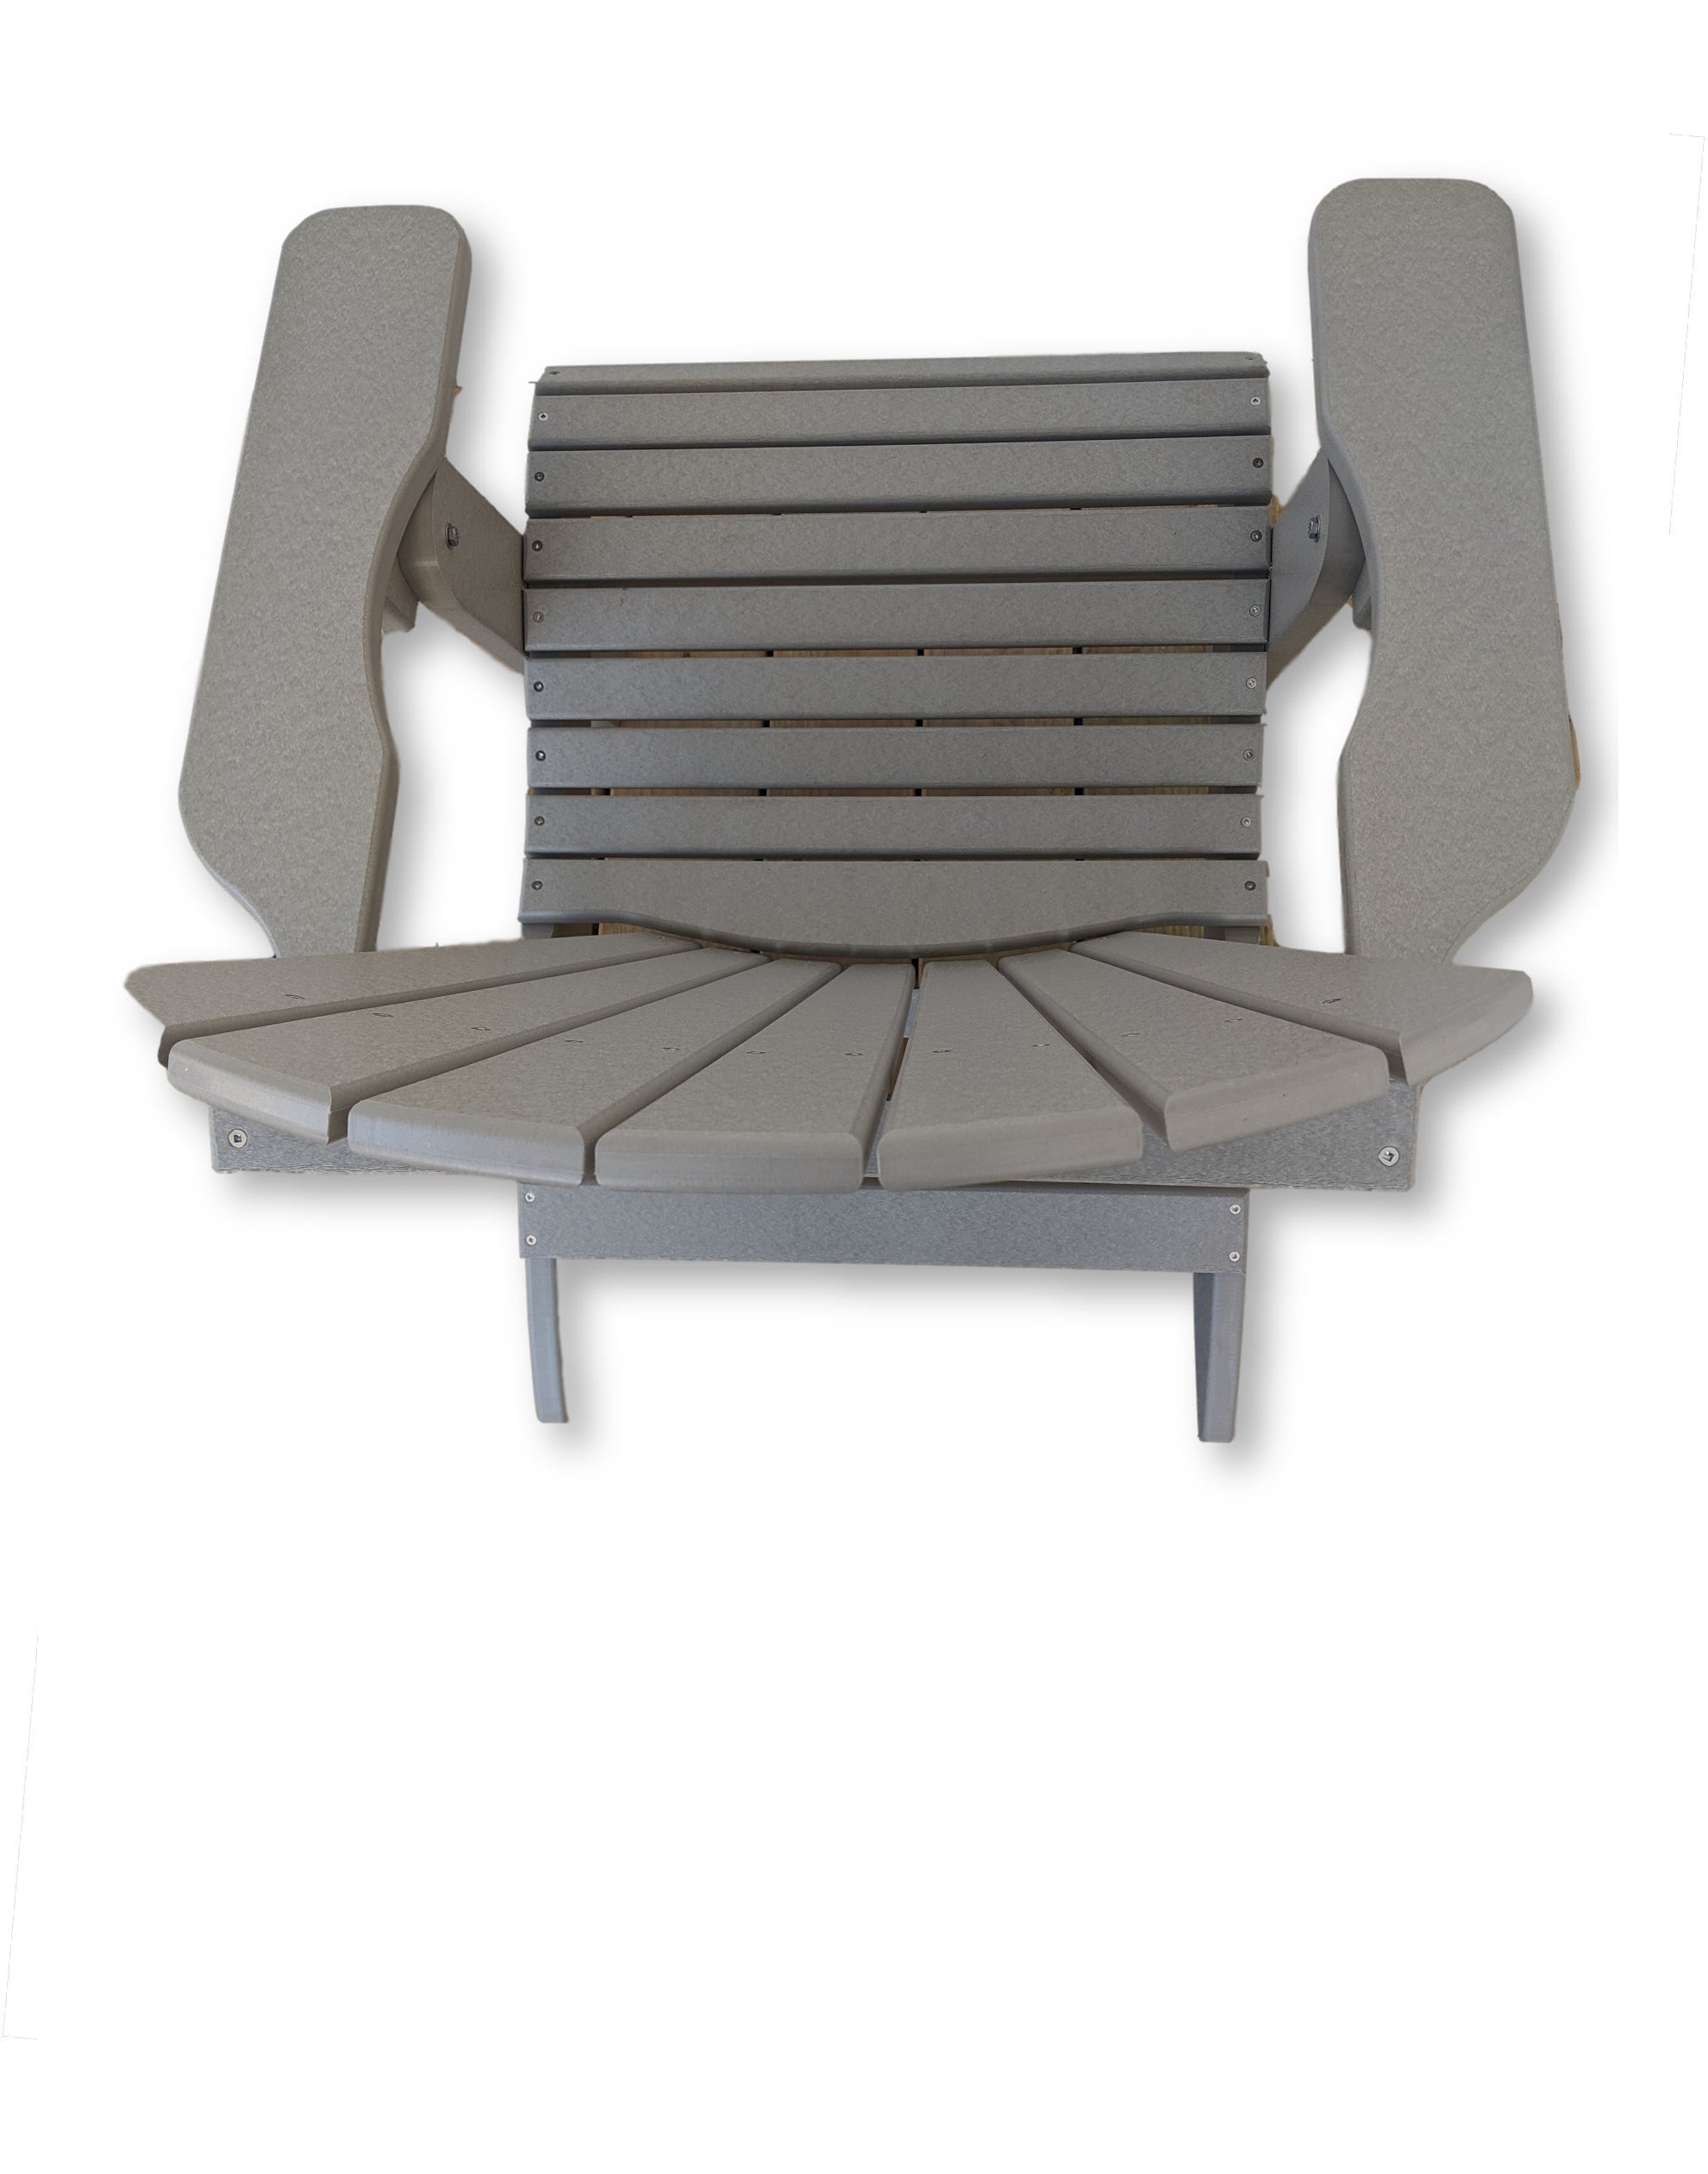 Dove Gray Folding Adirondack Chair(No Cup Holders)